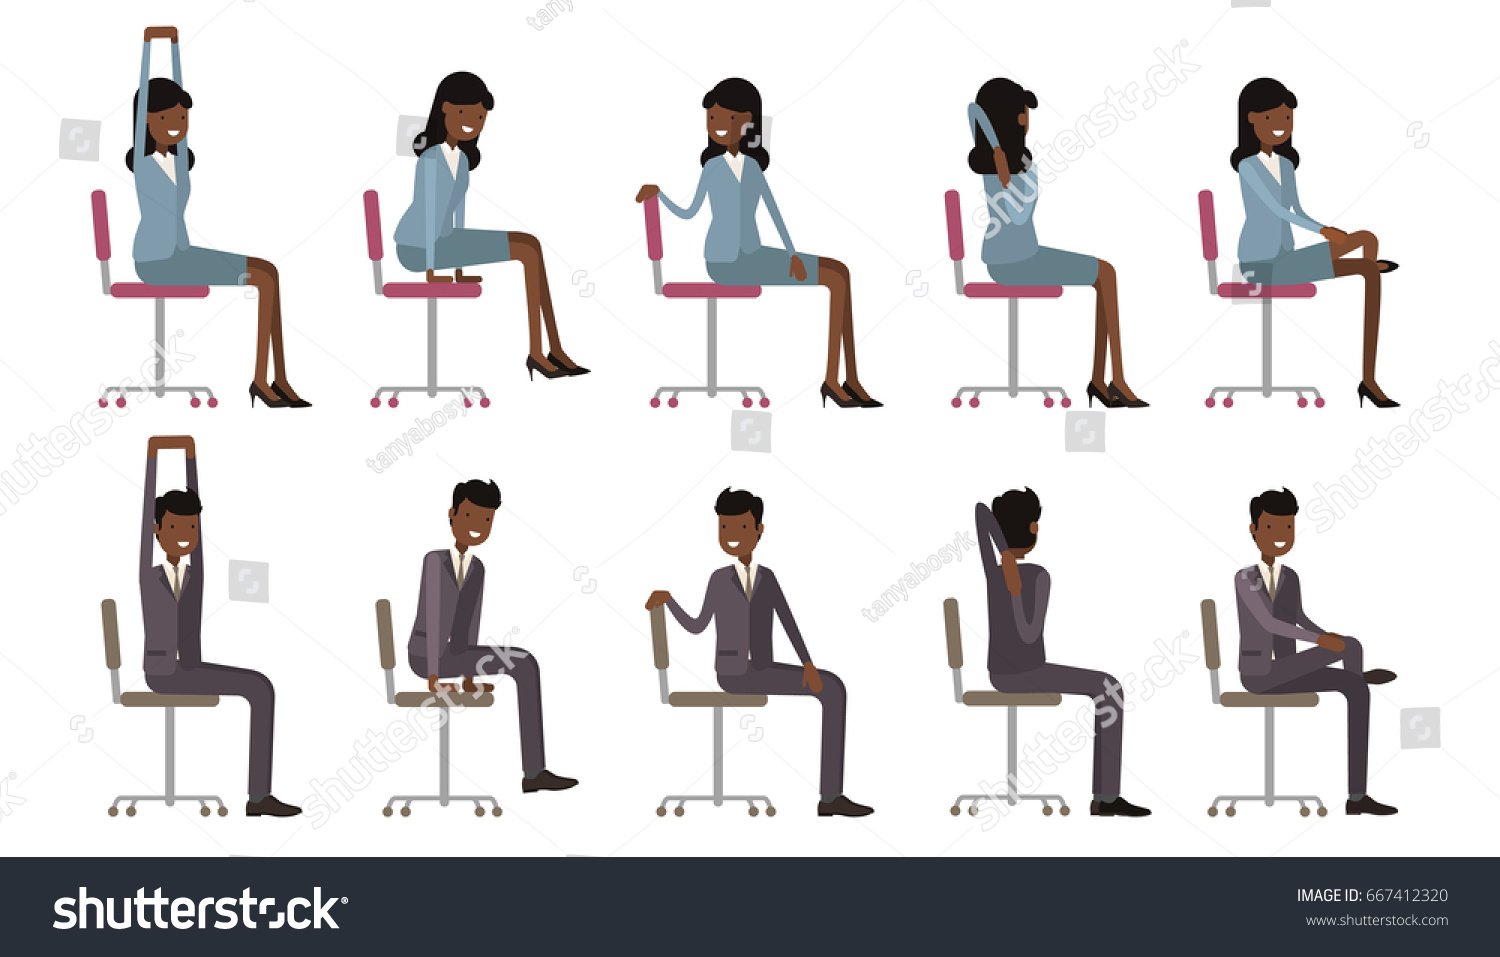 chair yoga for the office